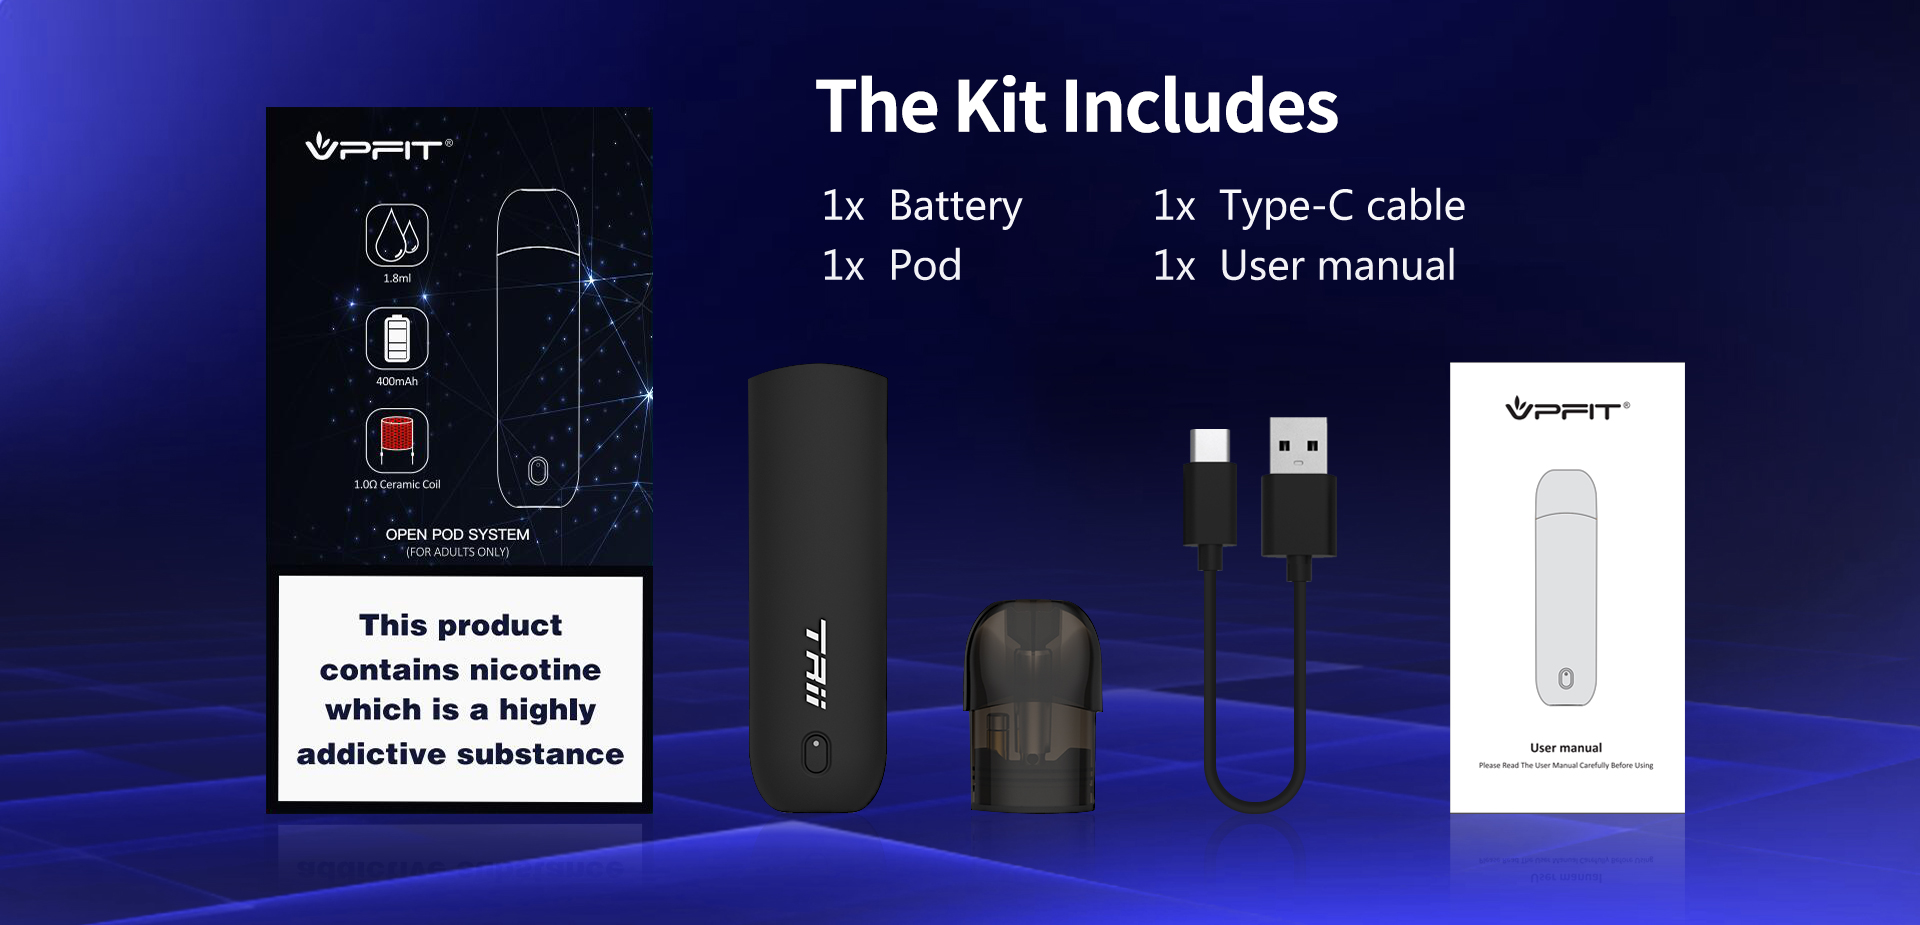 The vaping kit includes 